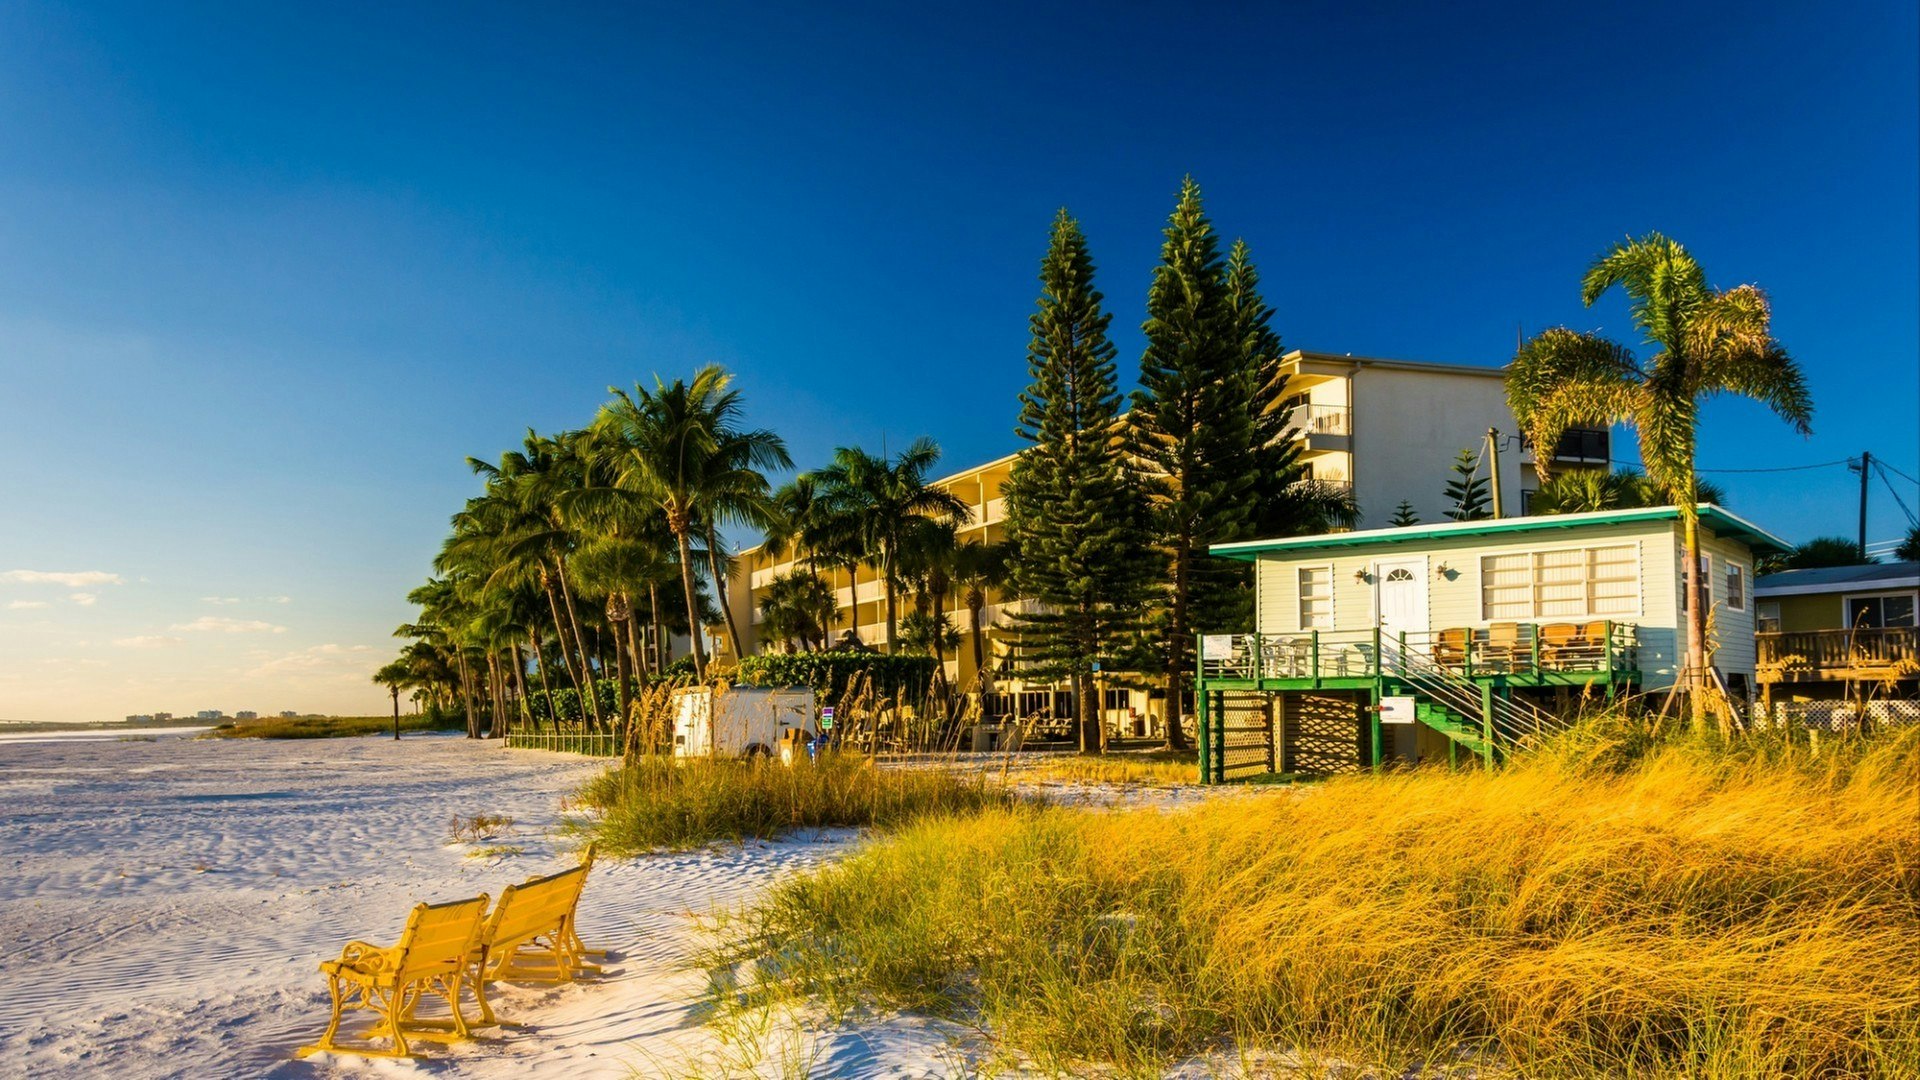 Sand dunes and buildings on the beach in Fort Myers Beach, Florida.